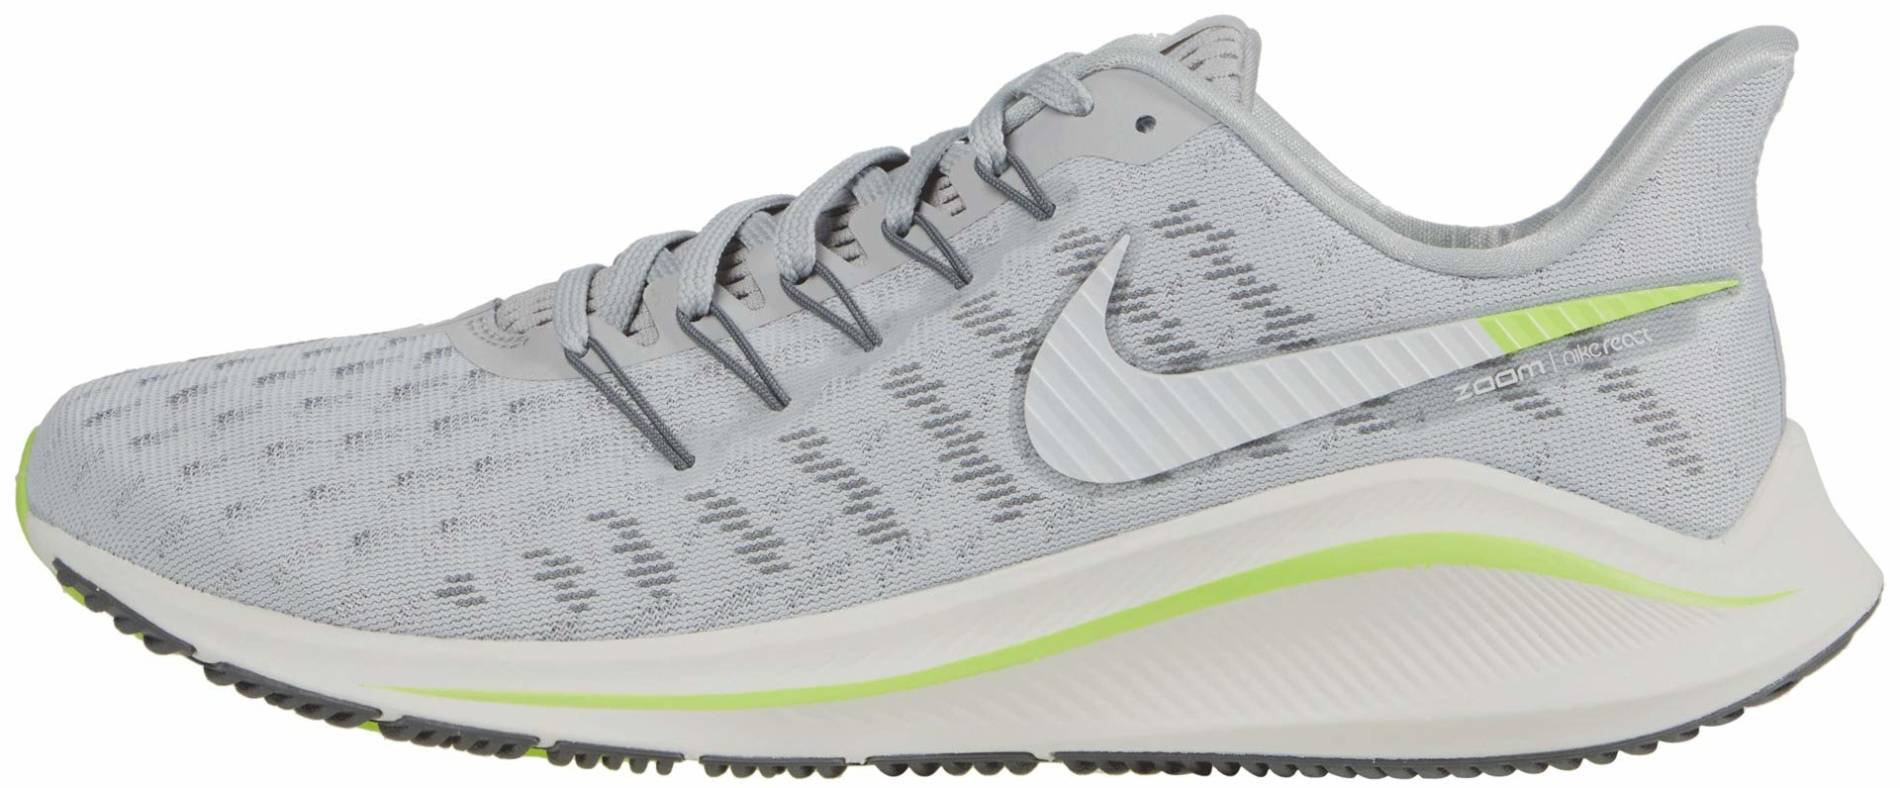 Save 50% on Nike Neutral Running Shoes 